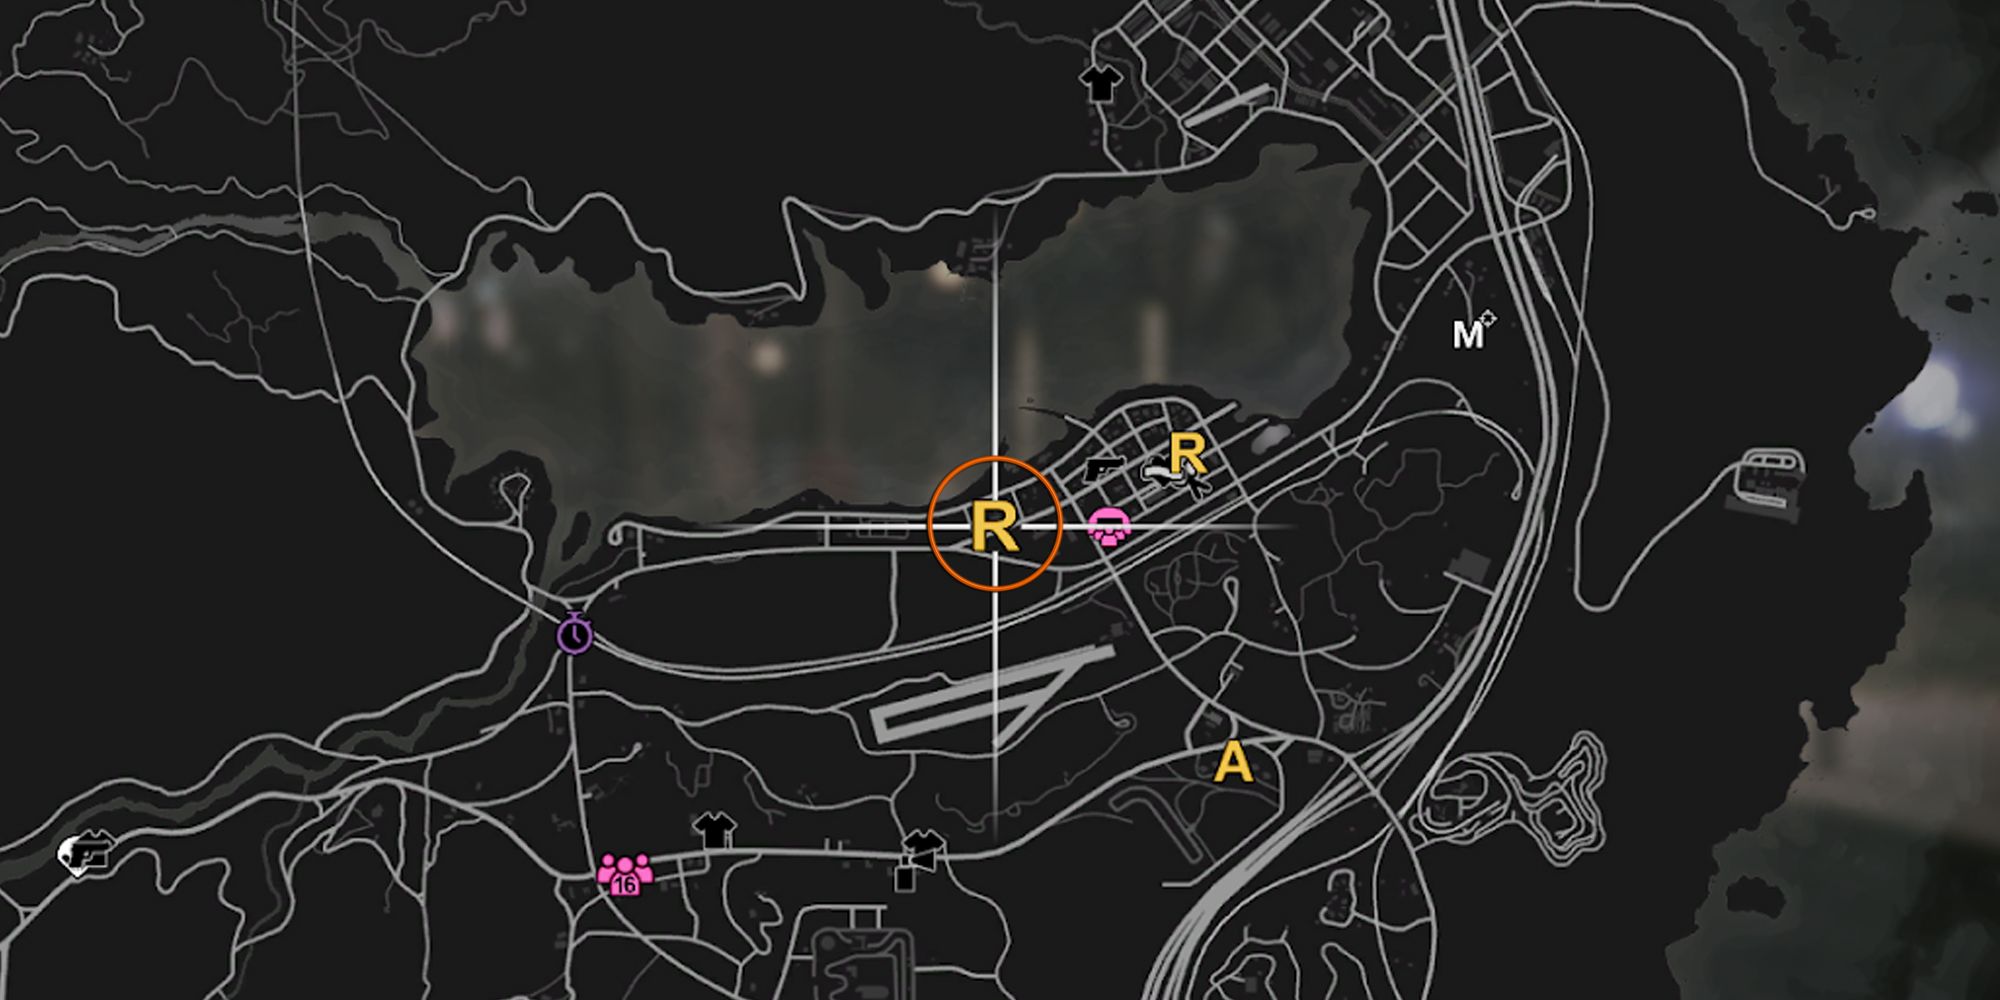 The image shows the Grand Theft Auto Online map with the yellow 'R' in Sandy Shores, indicating Ron's location.